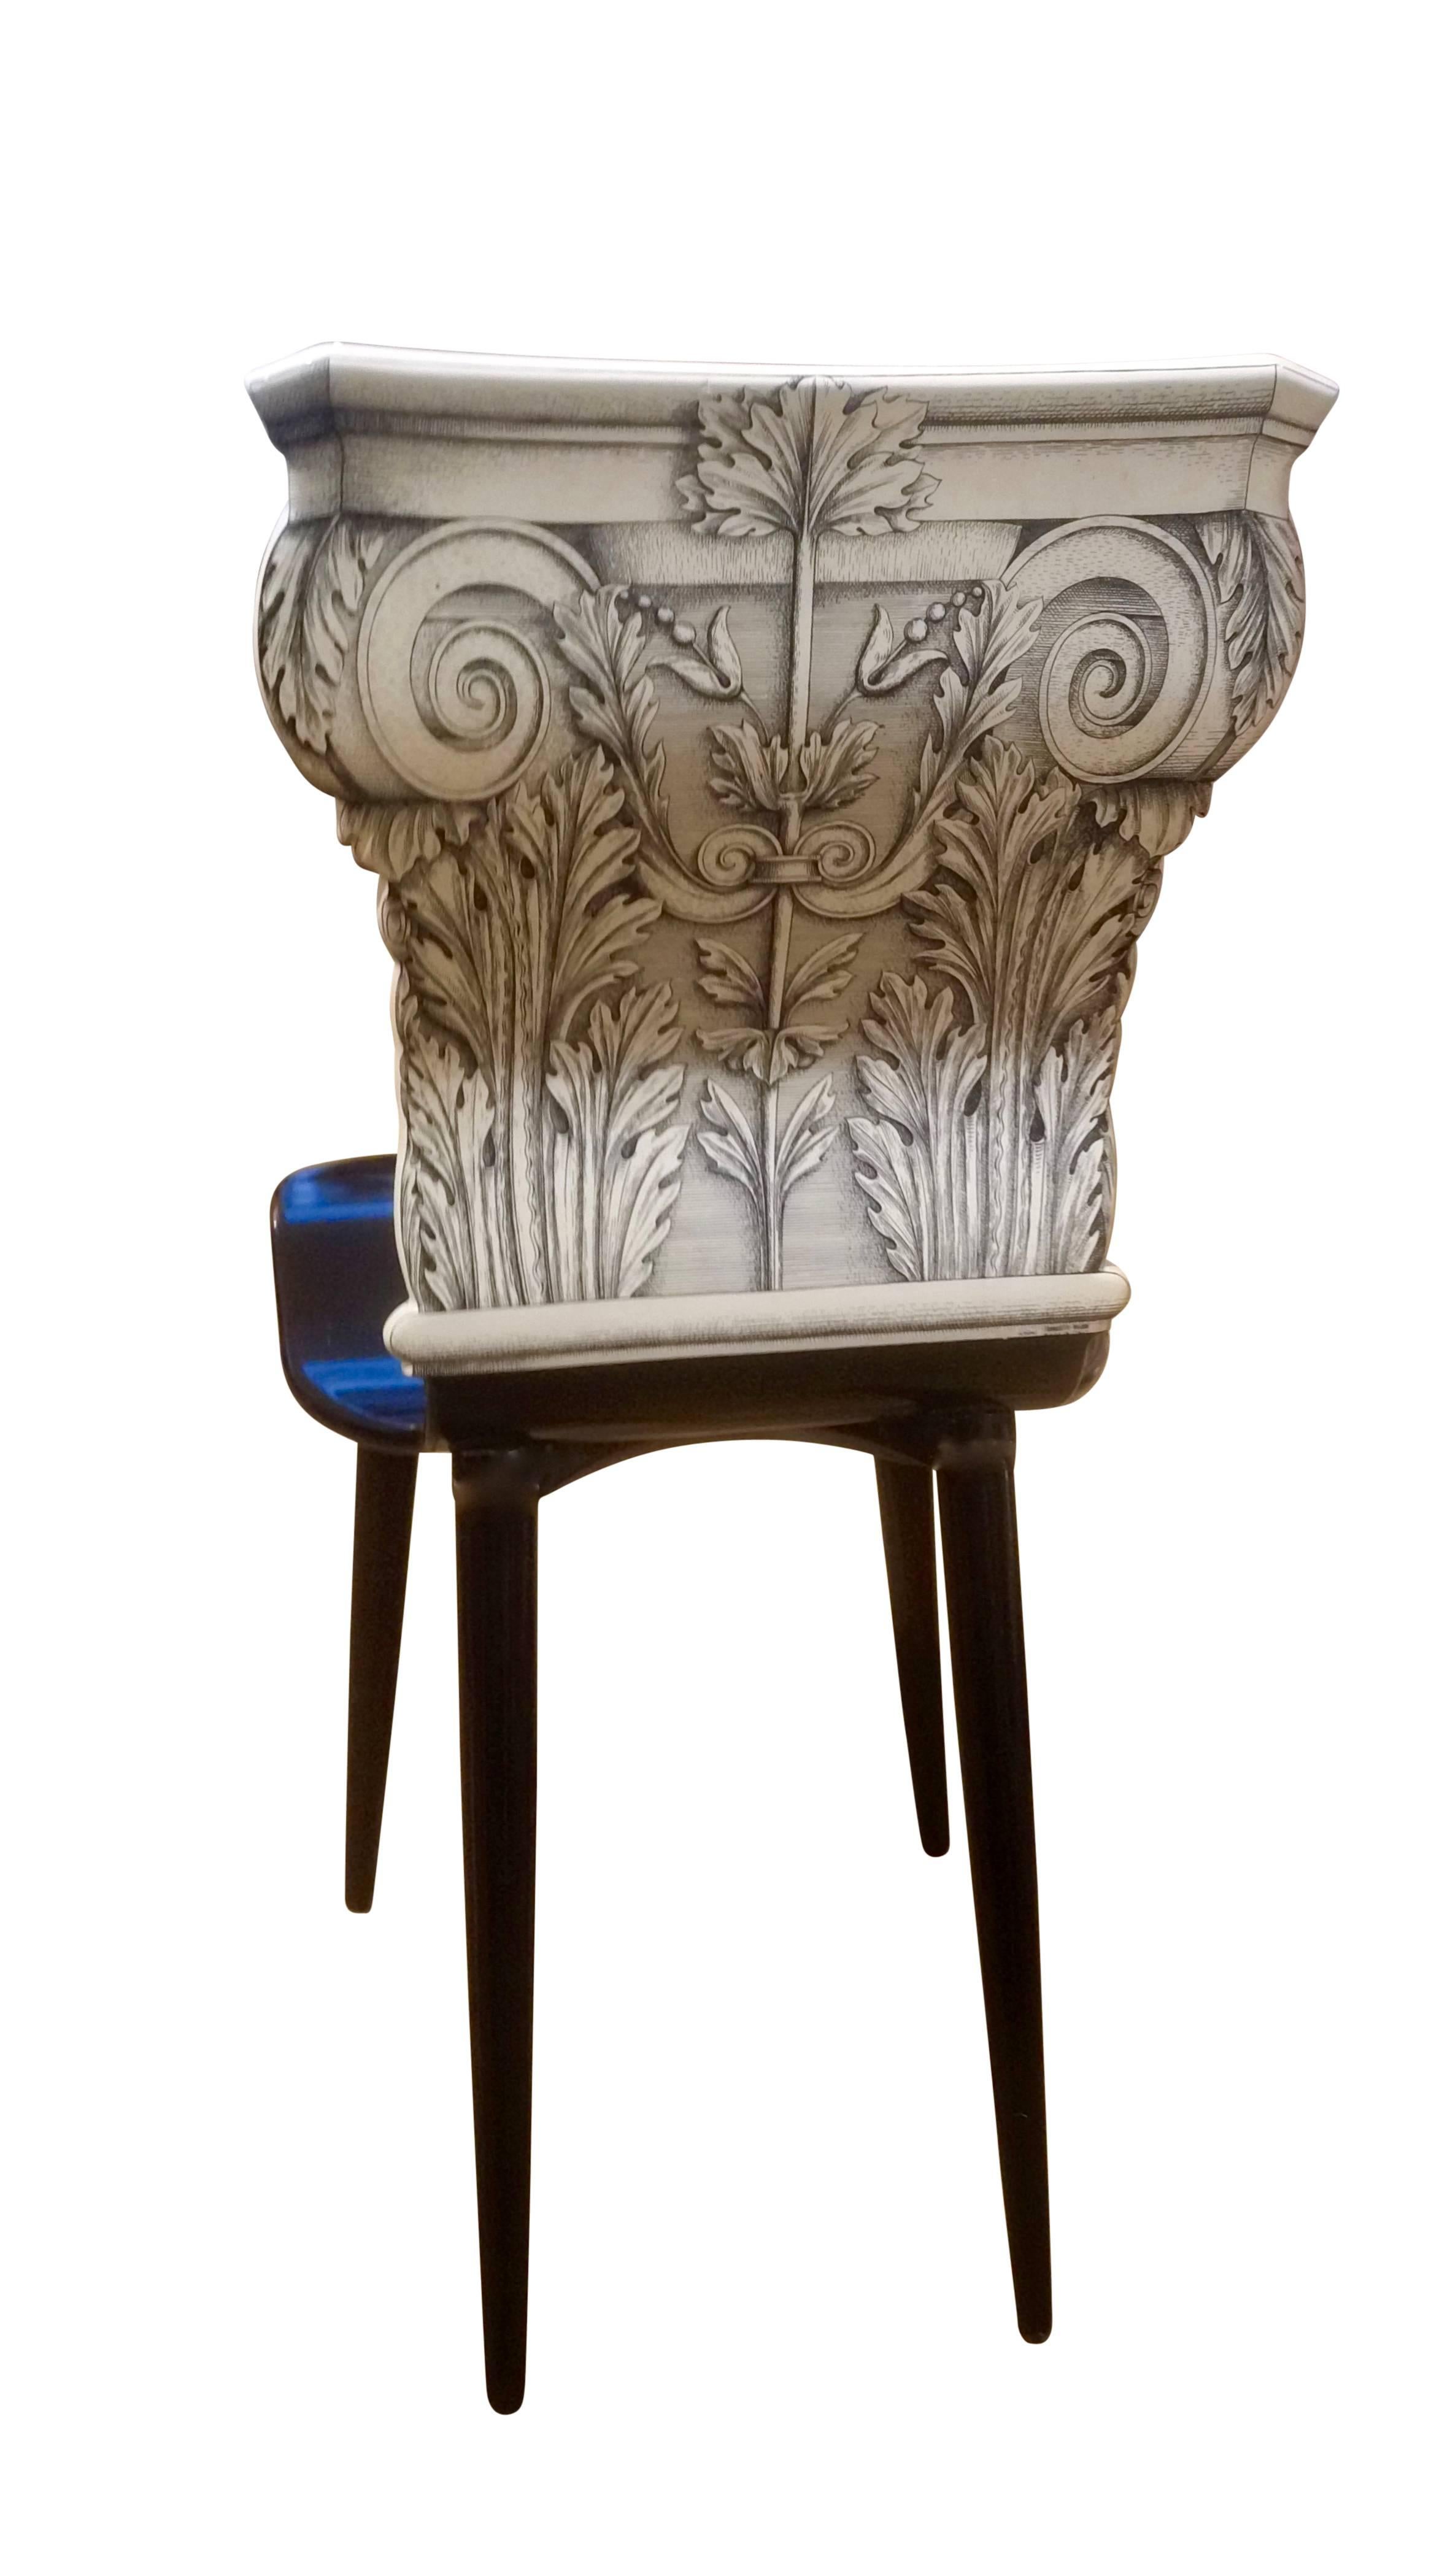 Piero Fornasetti 1913-1988, chair from the architecture series with Corinthian motif.
Signed Fornasetti Milano 2001.